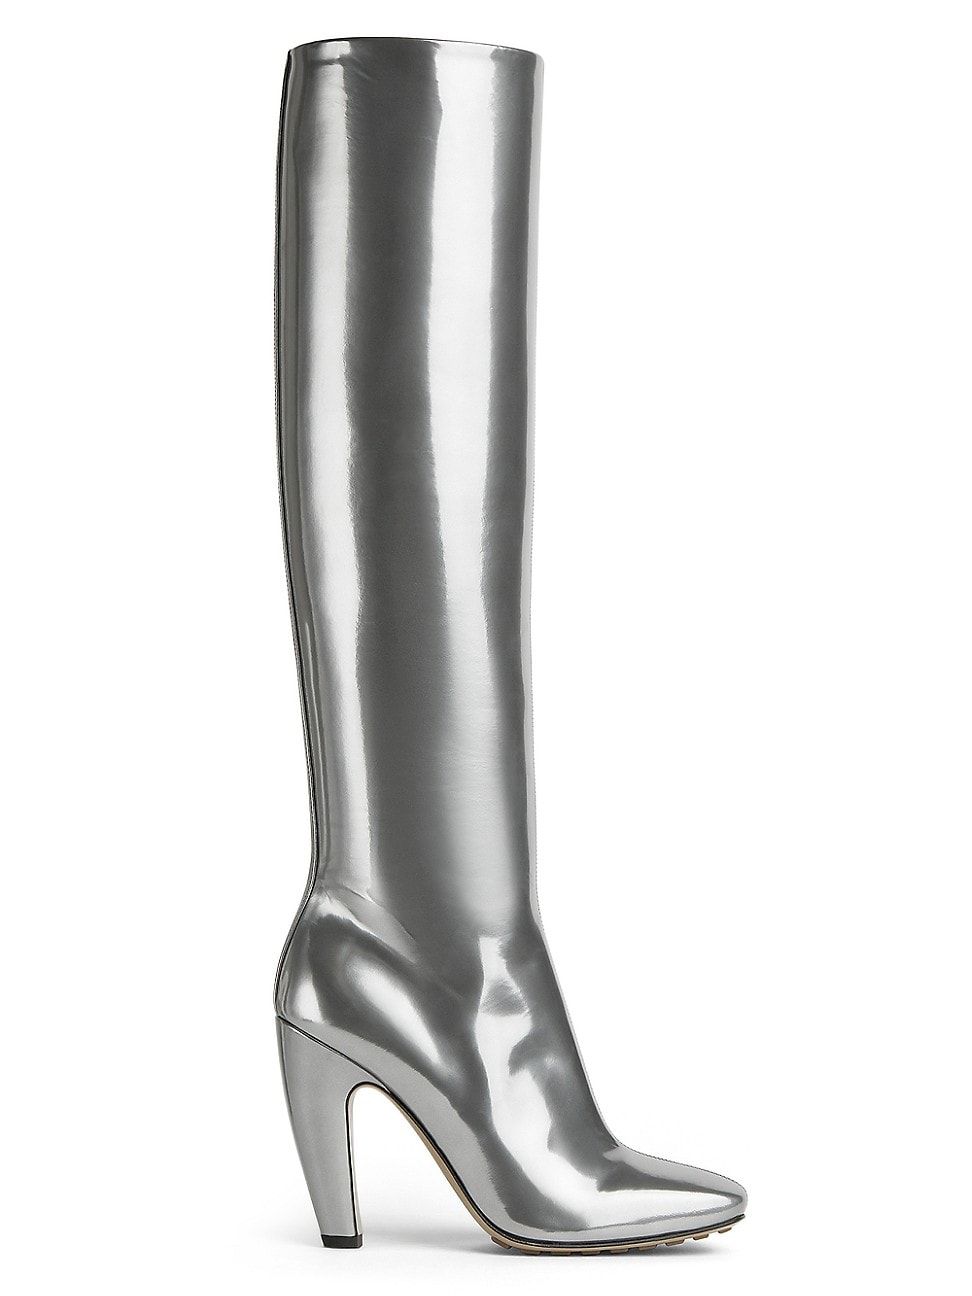 Metallic Leather Tall Boots 